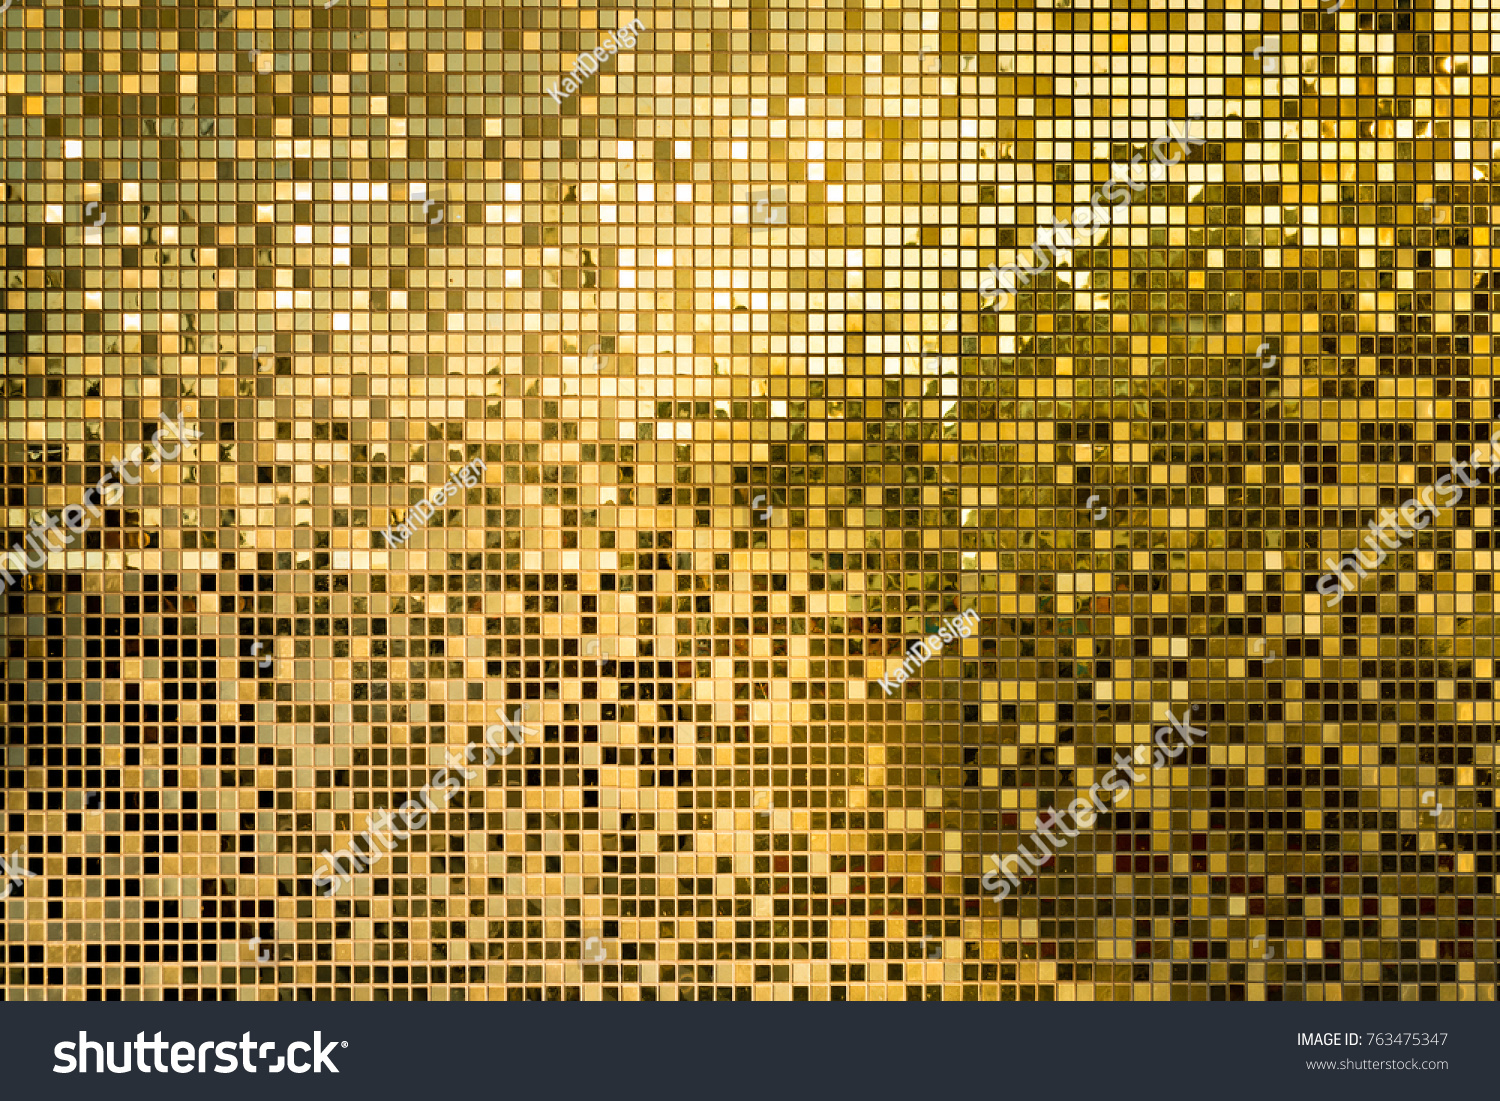 Gold yellow square mosaic tiles for texture background #763475347